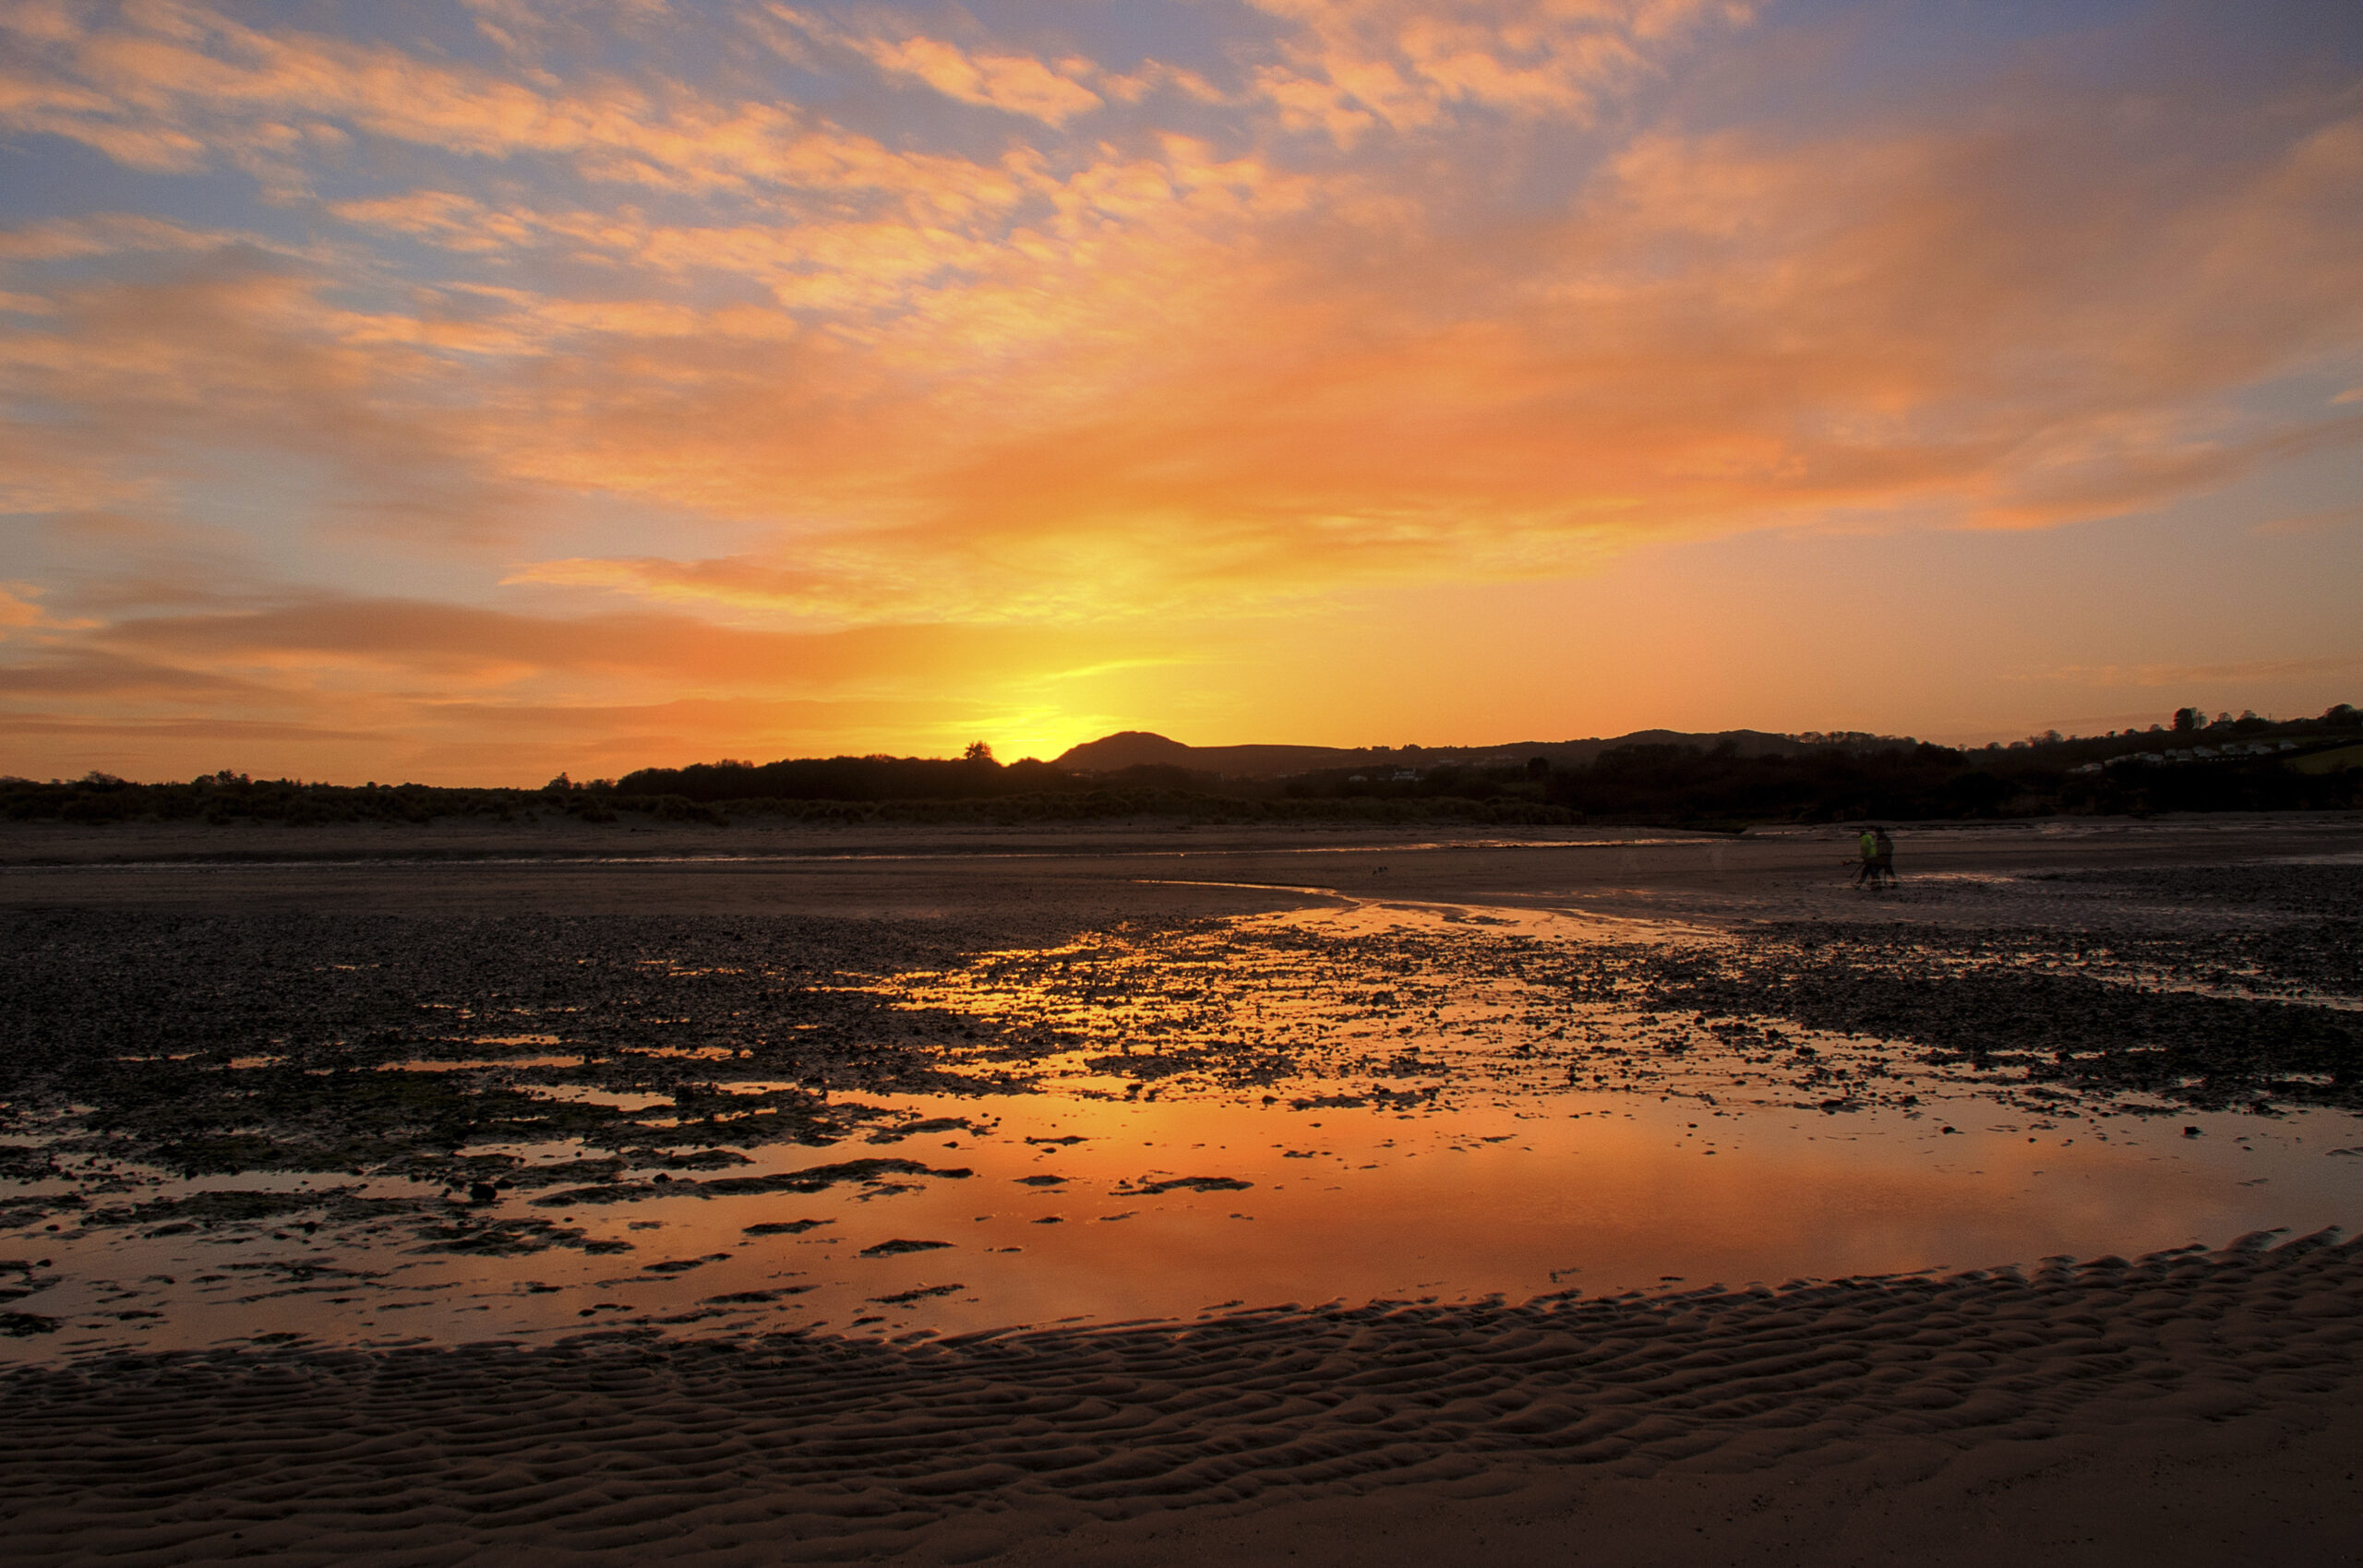 The beach at Red Wharf Bay, Anglesey, North Wales illuminated by the setting sun